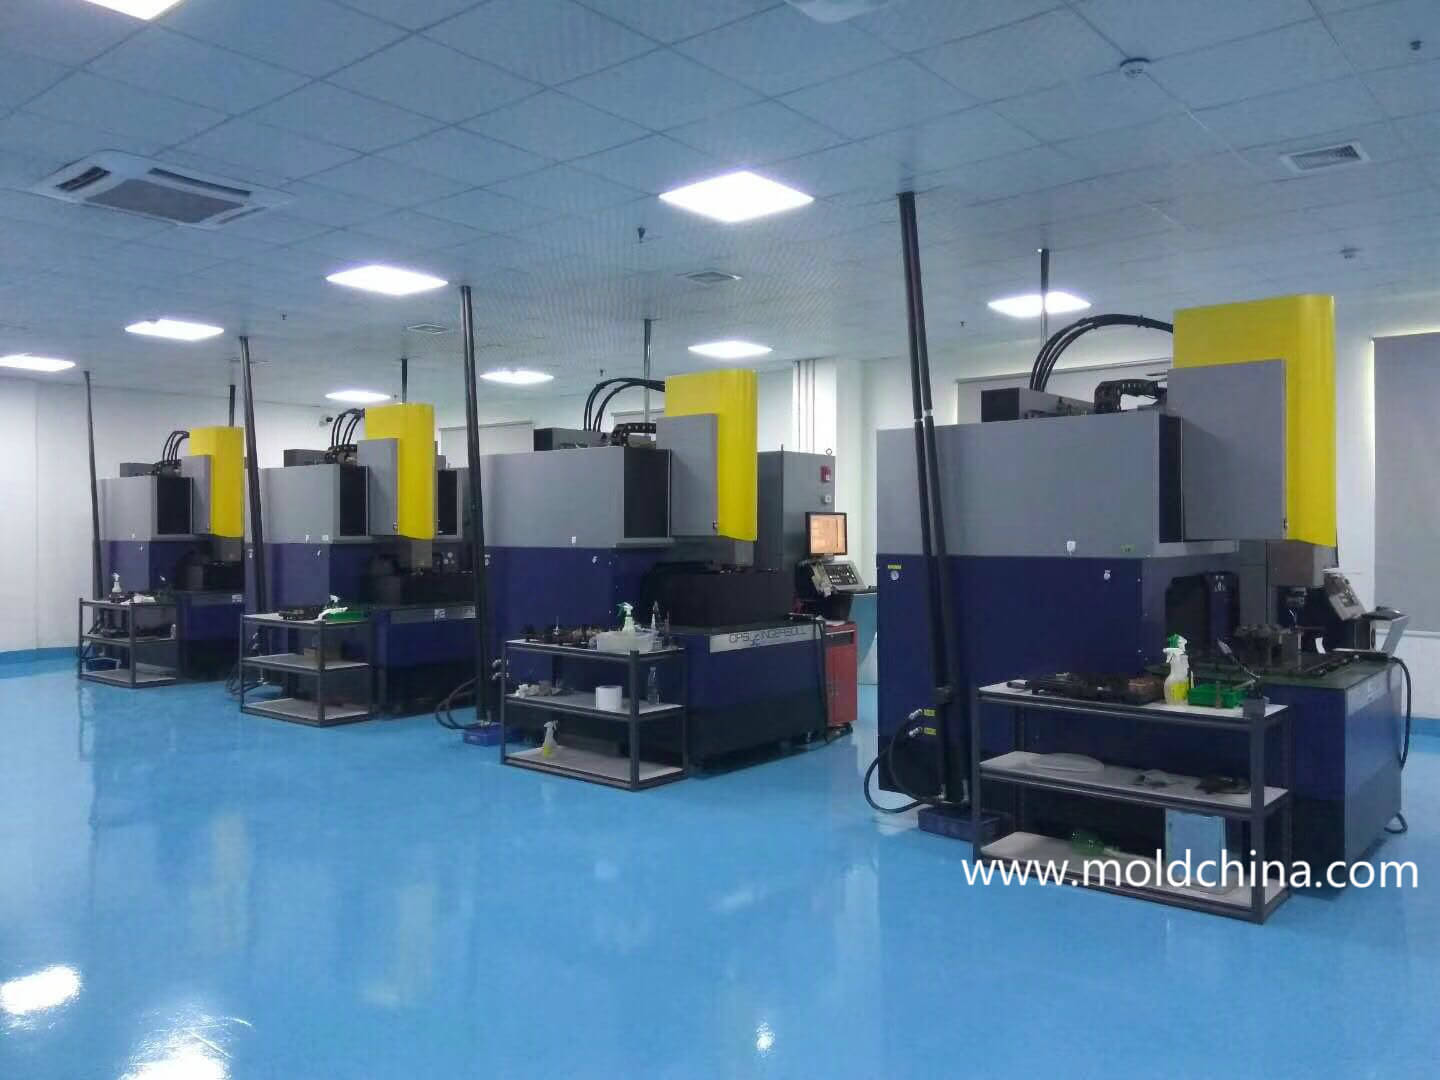 Dimensional instability in plastic injection molding process